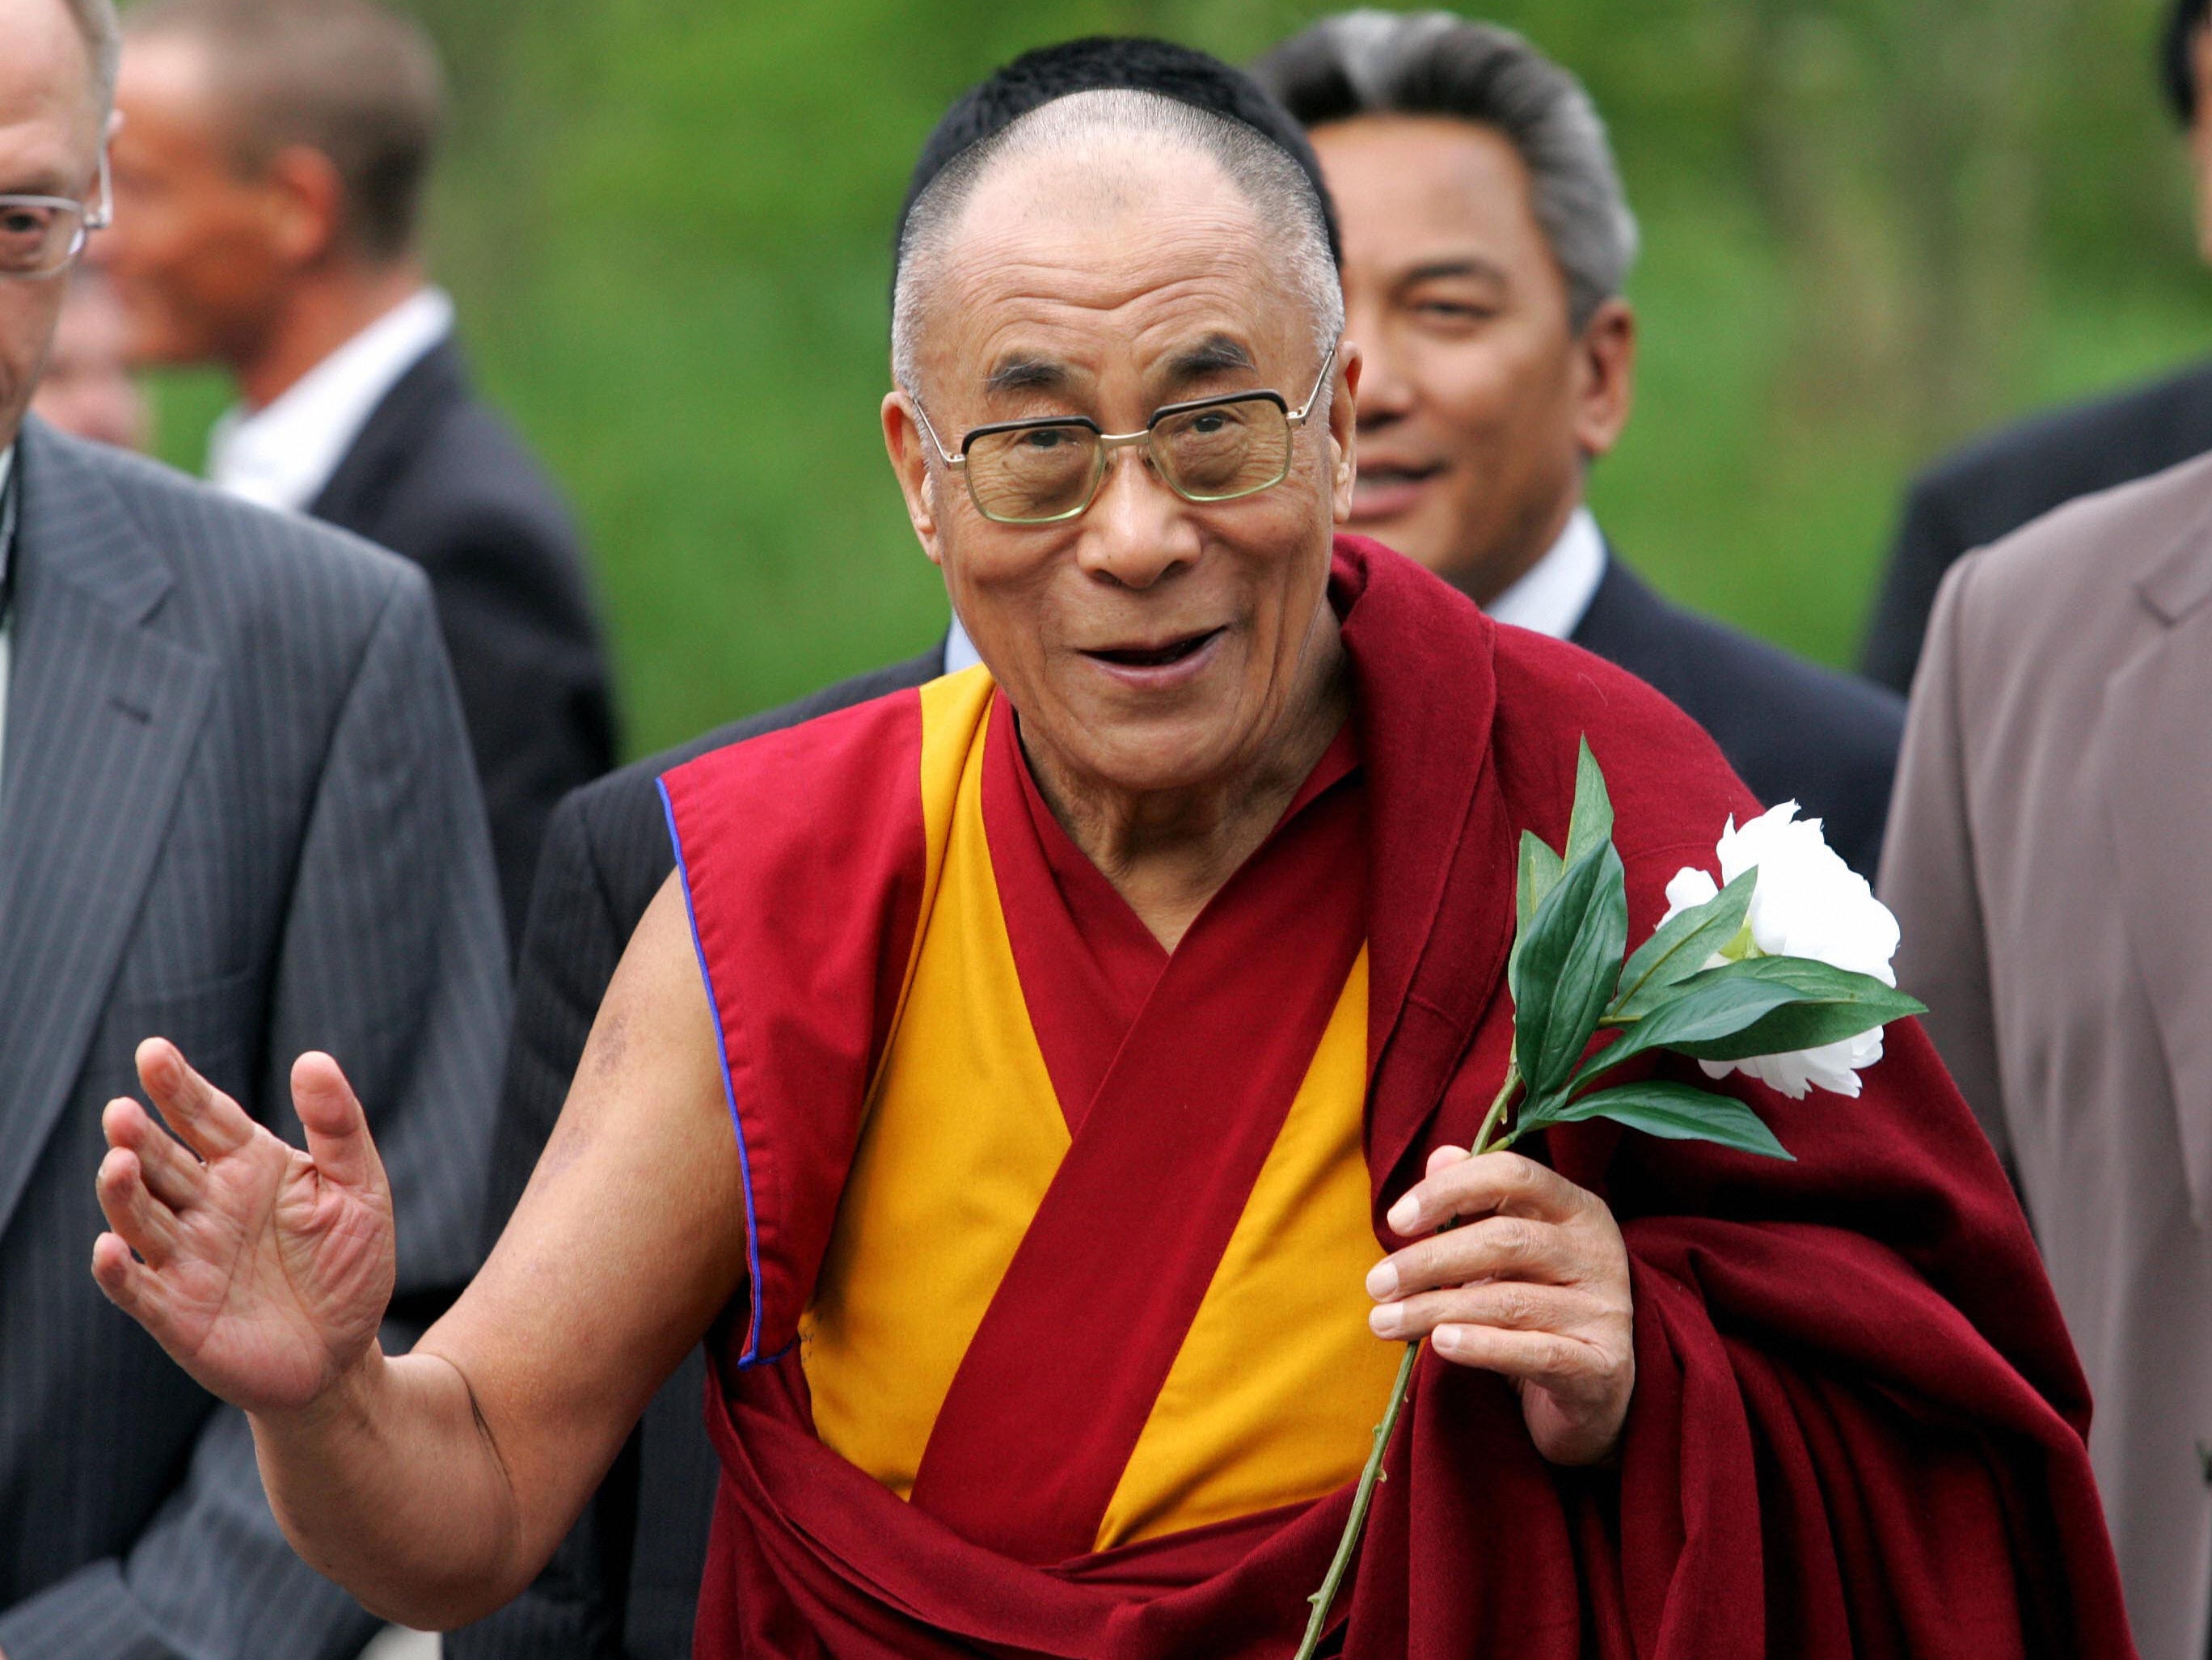 ‘This beautiful blue planet is our only home’: Dalai Lama makes a